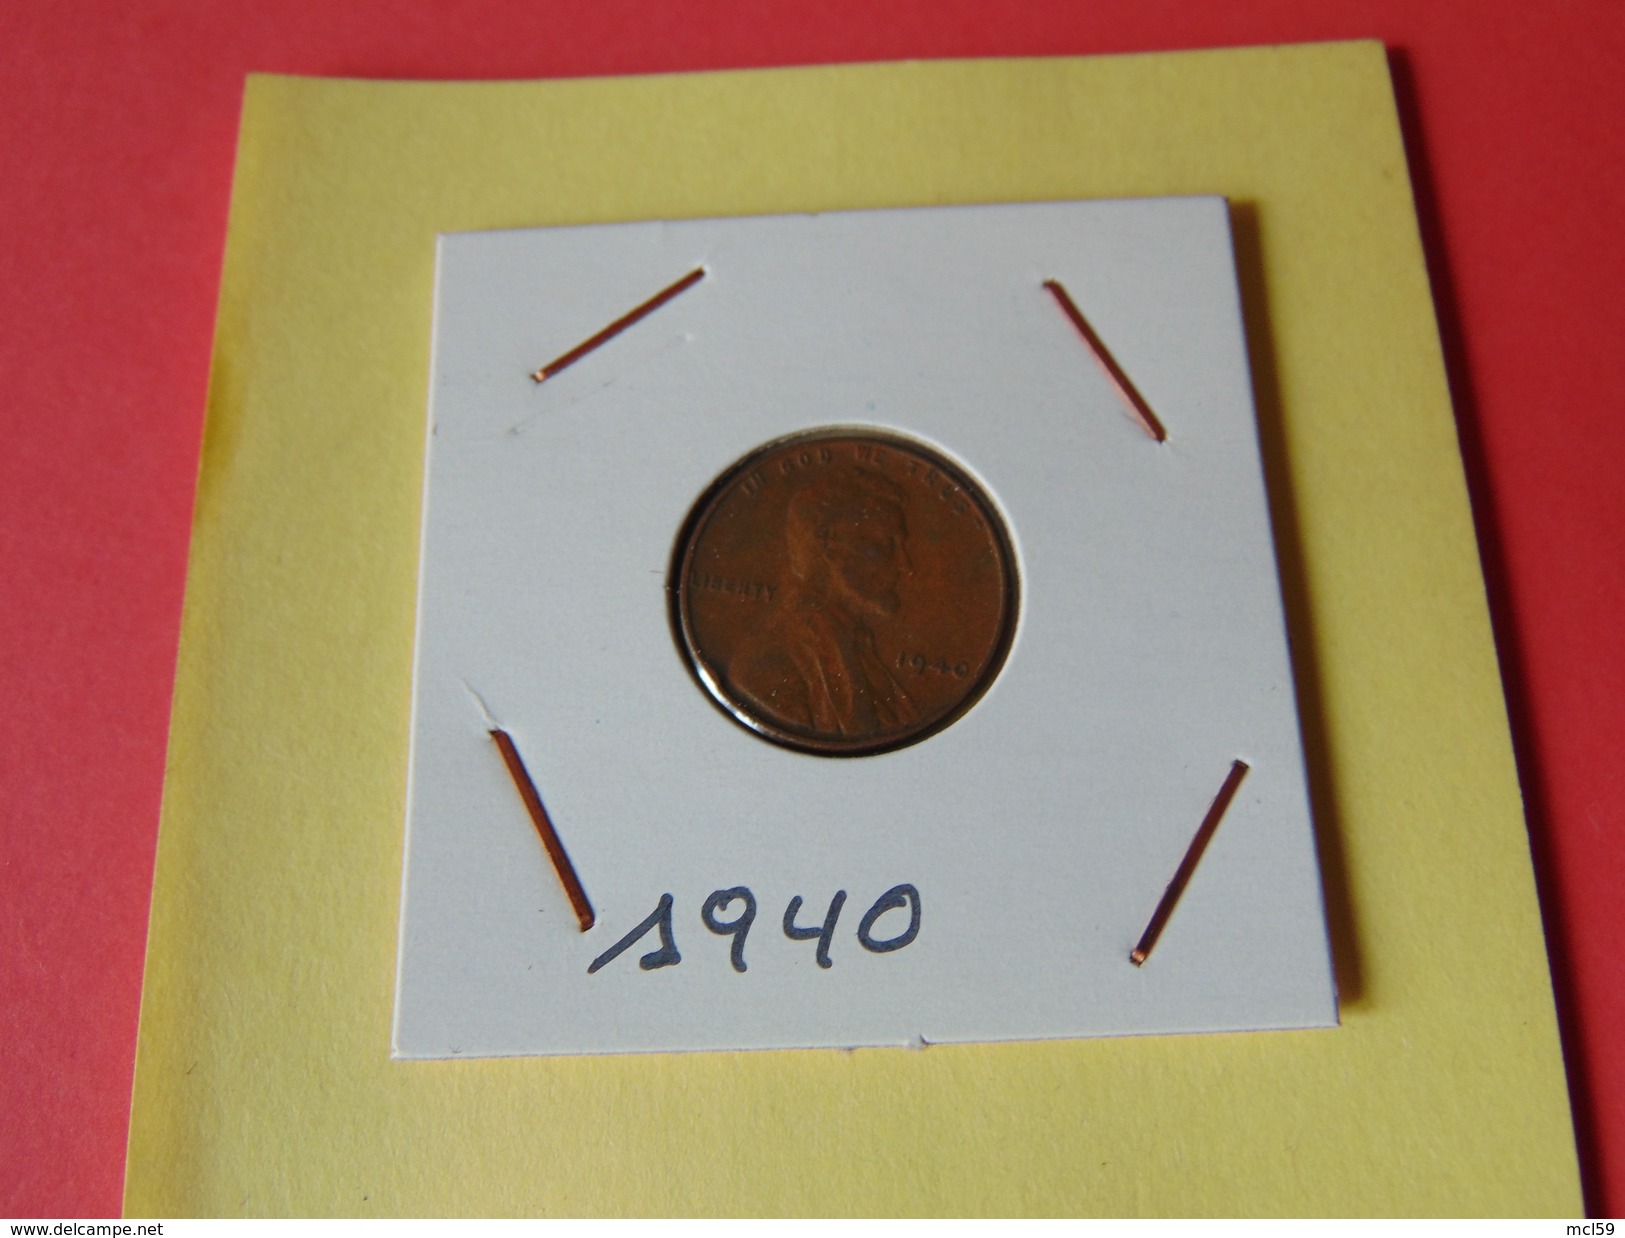 Lincoln 1940 - 1909-1958: Lincoln, Wheat Ears Reverse